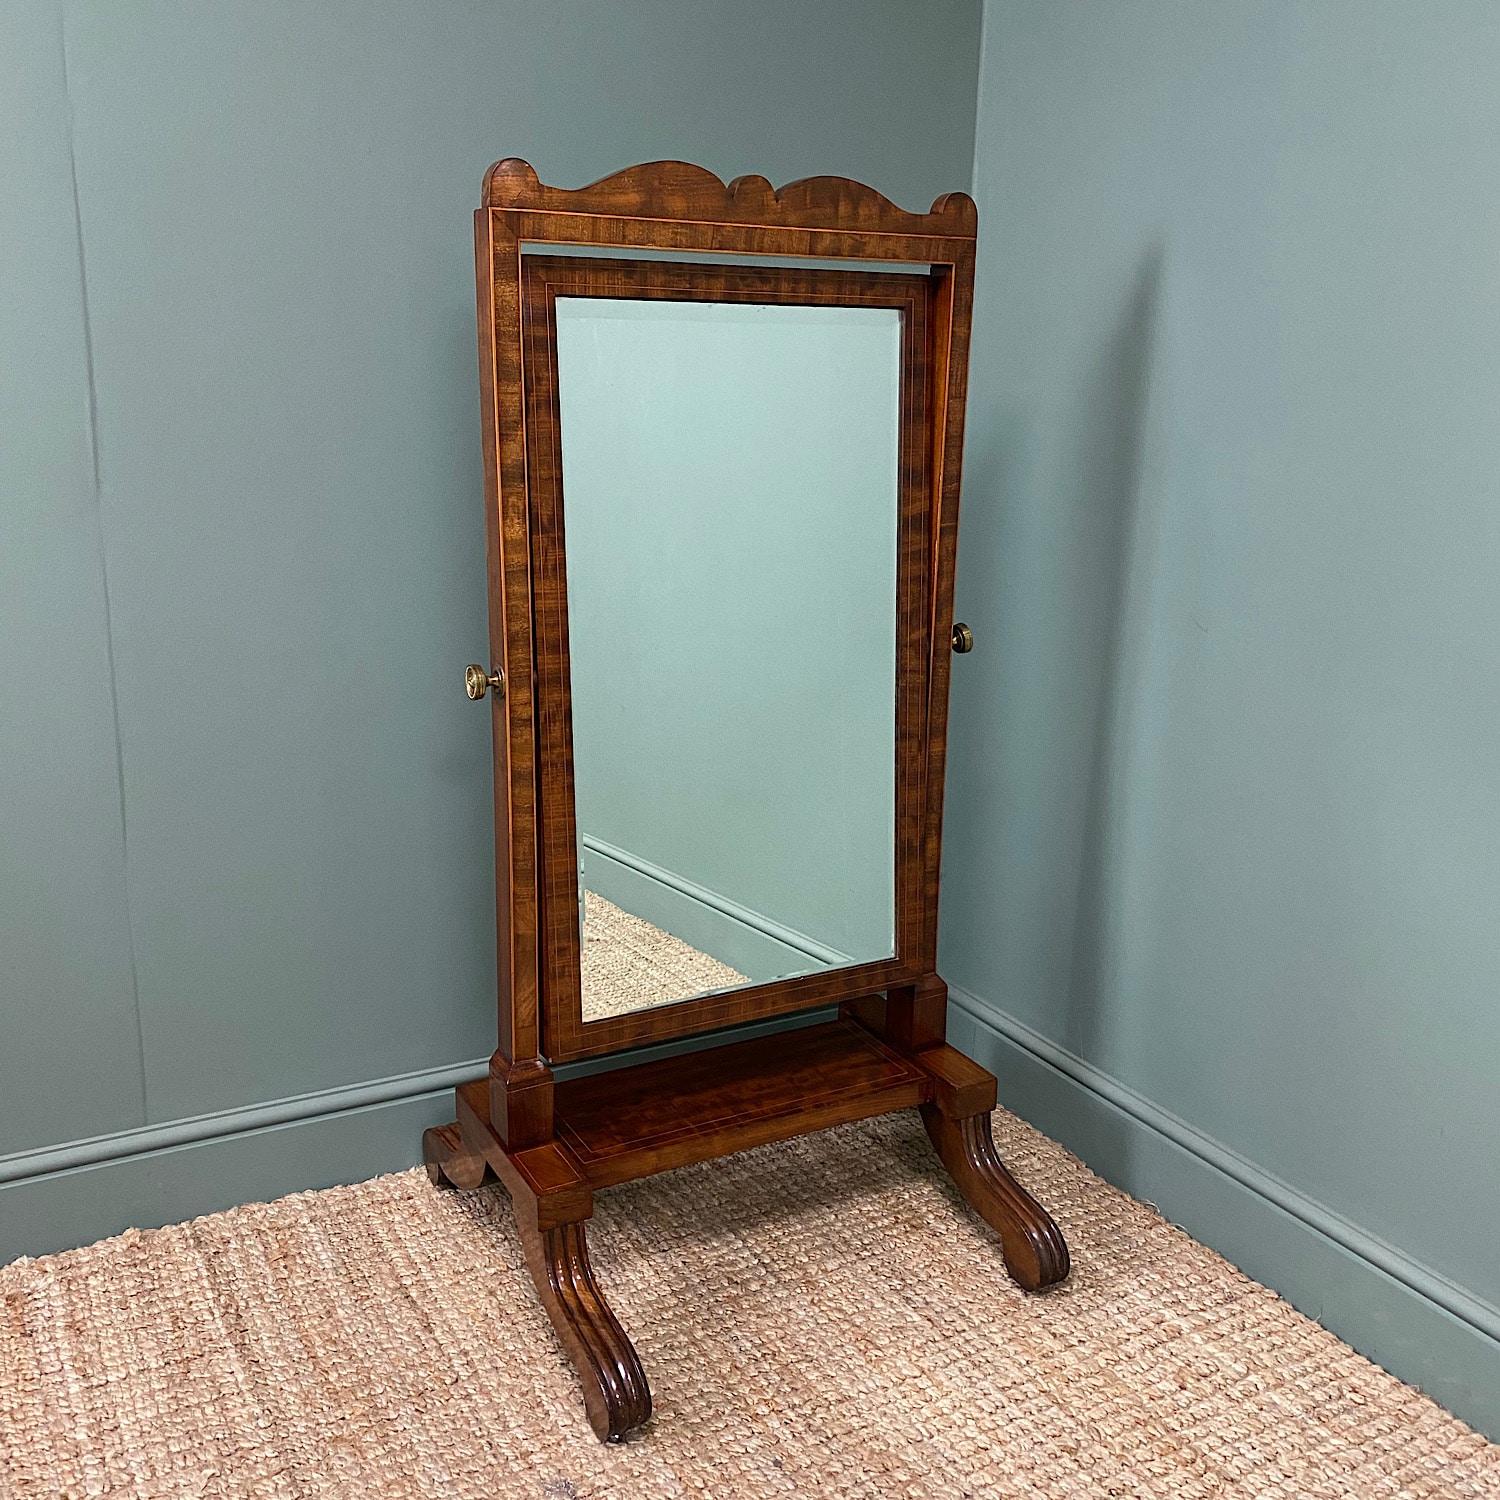 Elegant Small Victorian Inlaid Antique Cheval Mirror

This Elegant 19th century Small Victorian Inlaid Antique Cheval Mirror dates from circa, 1850 and has a shaped pediment above the original tilting bevelled mirror, beautifully cross-banded and